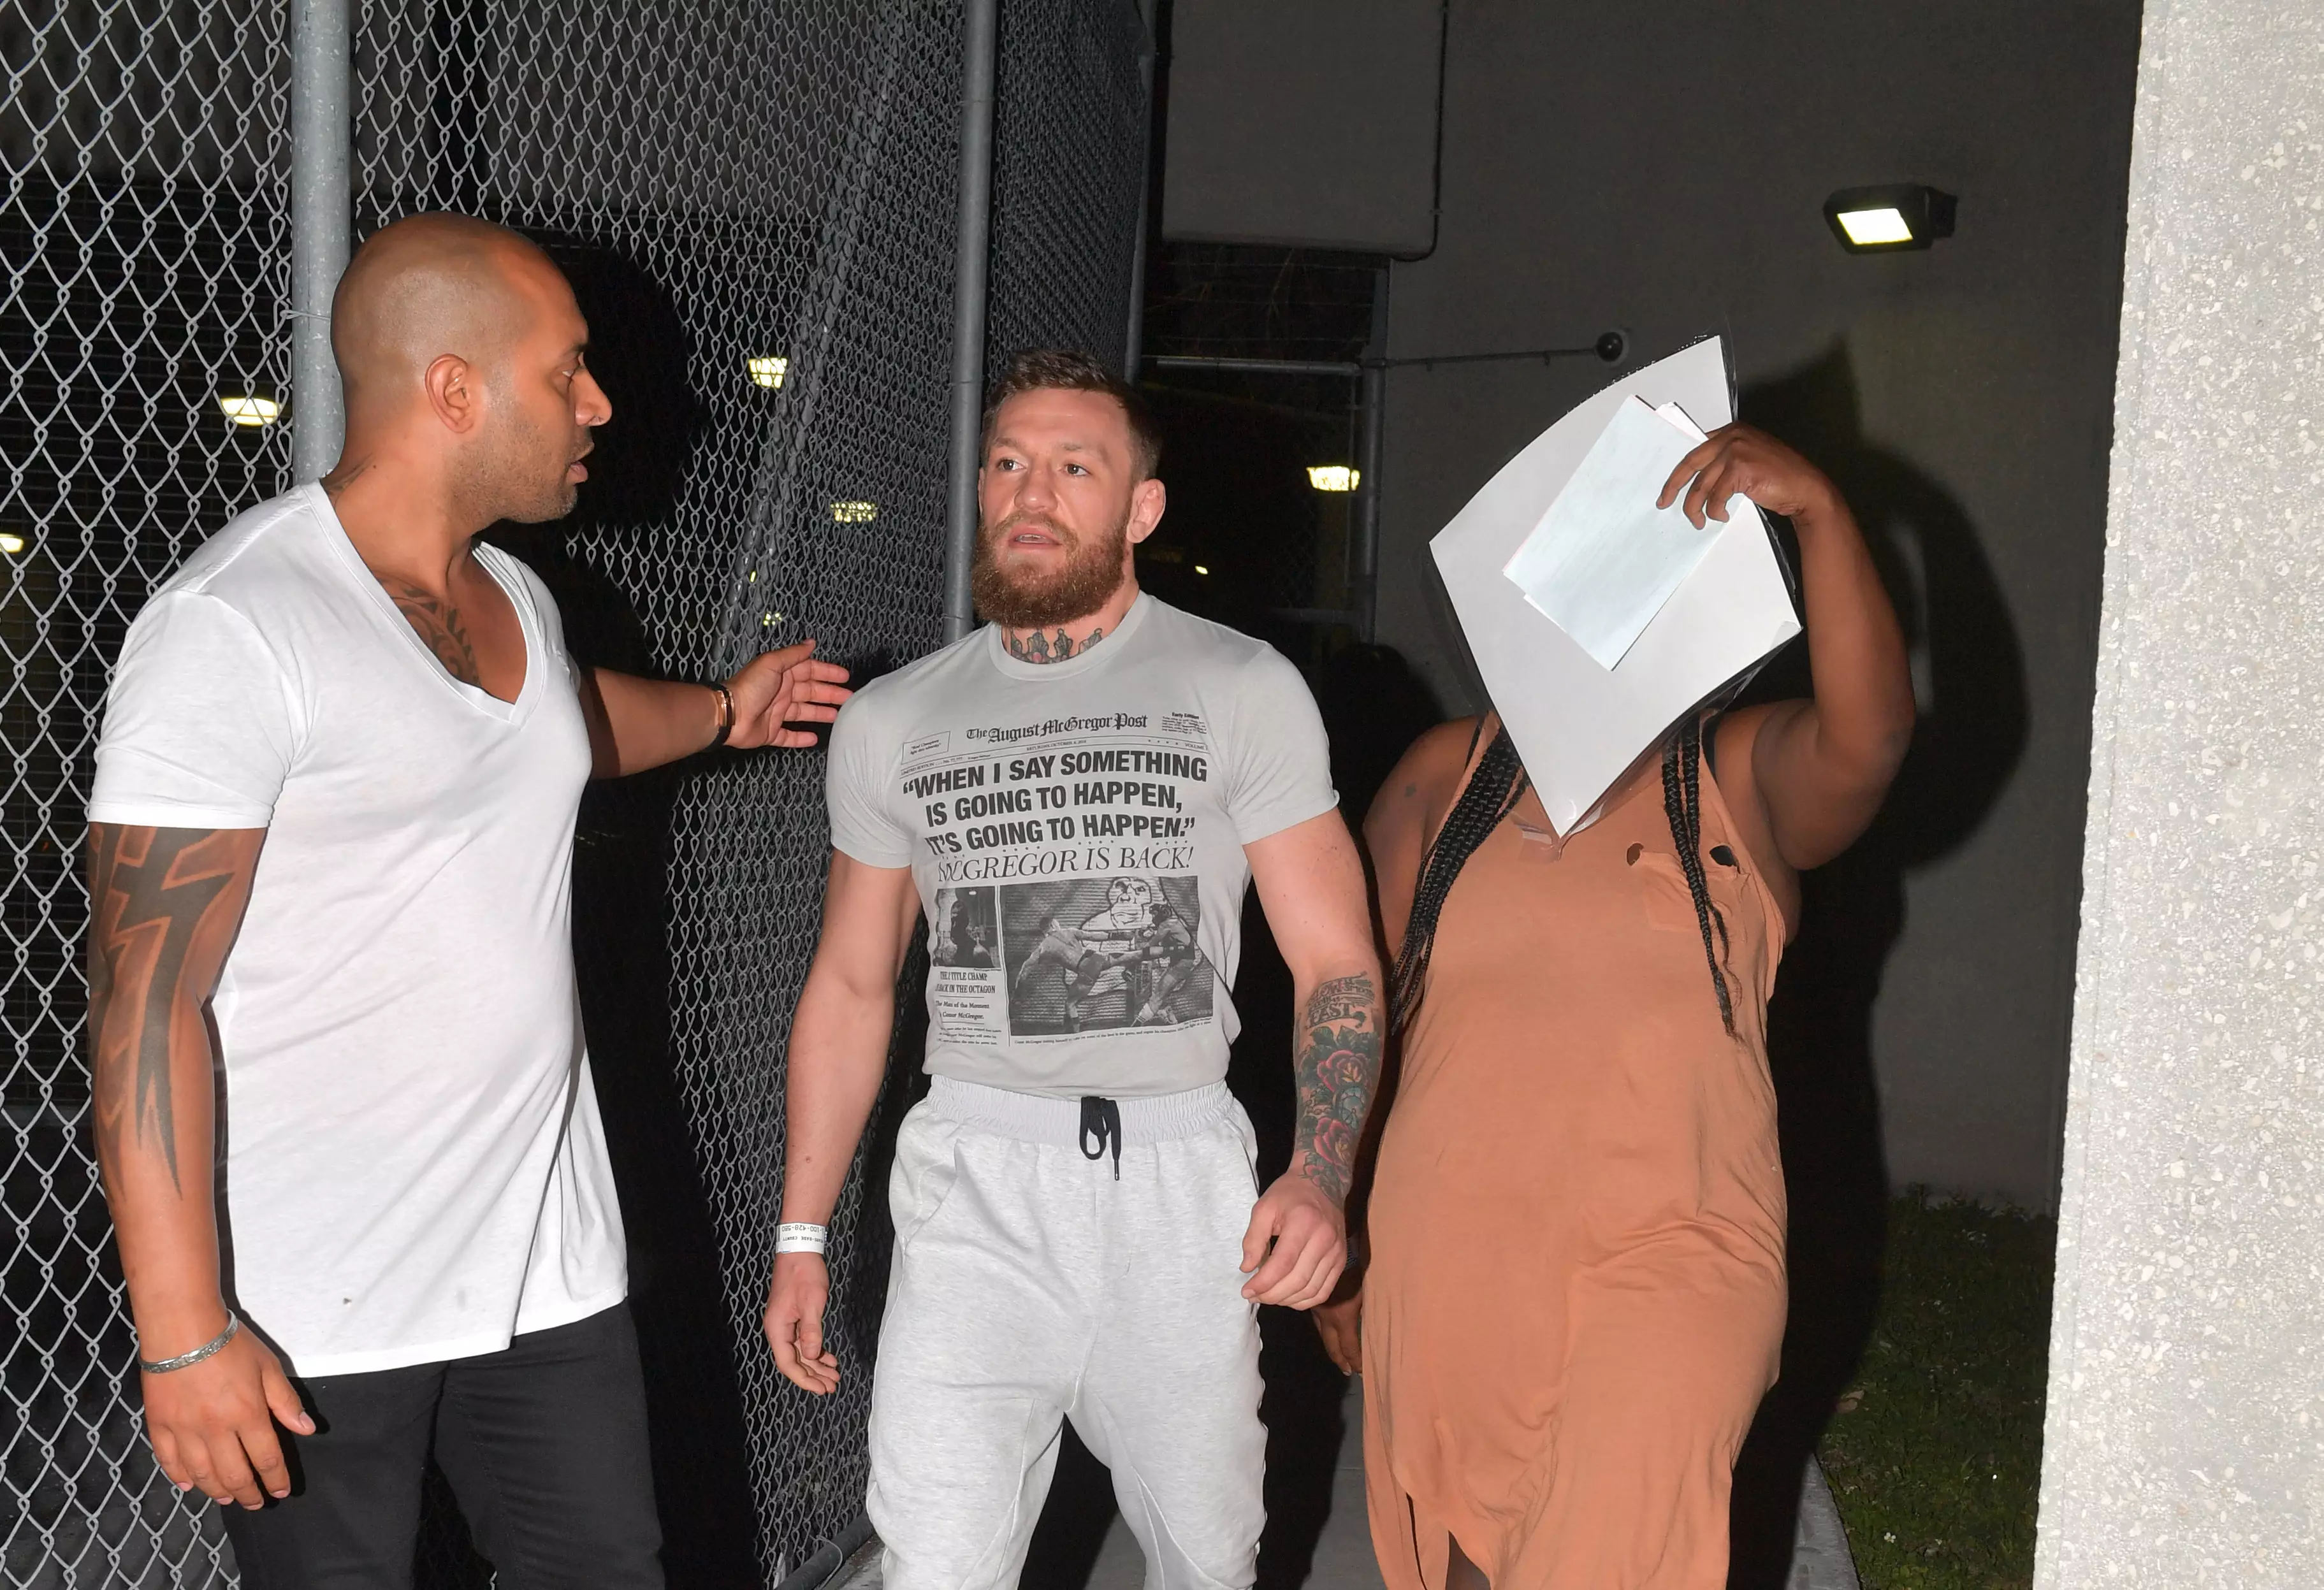 McGregor after being released from jail in Miami in March 2019. Image: PA Images